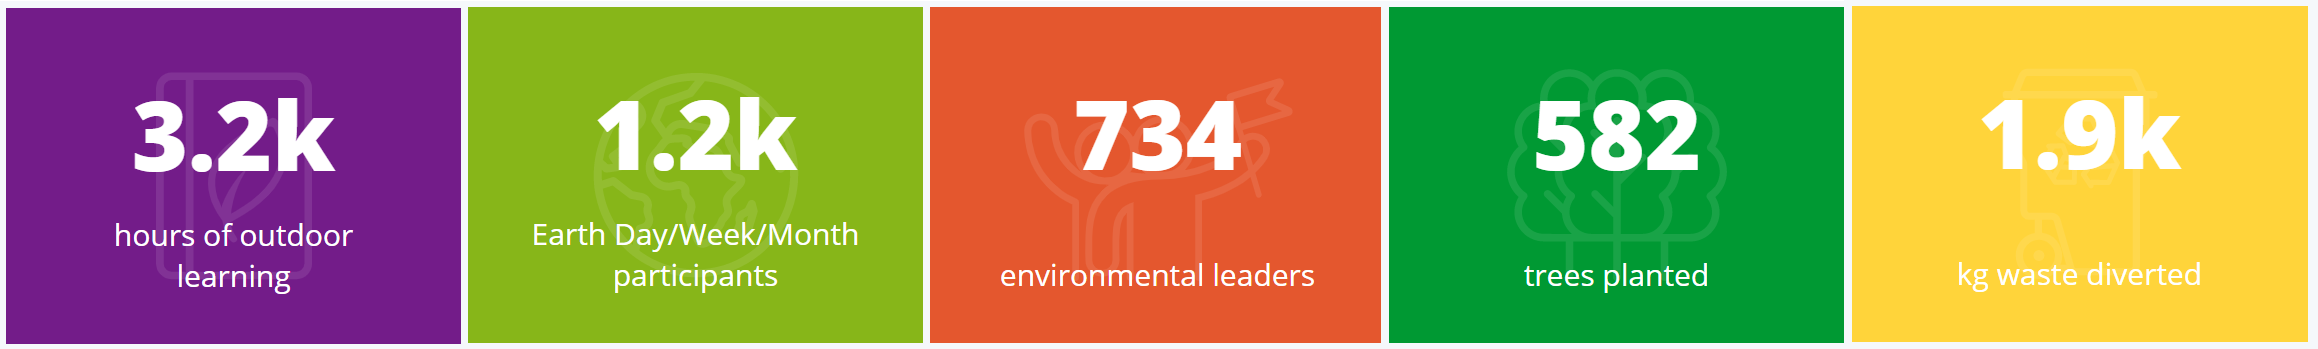 3.2K hours of outdoor learning, 1.2K Earth Day/Week/Month participants, 734 environmental leaders, 582 trees planted, 1.9k kg waste diverted